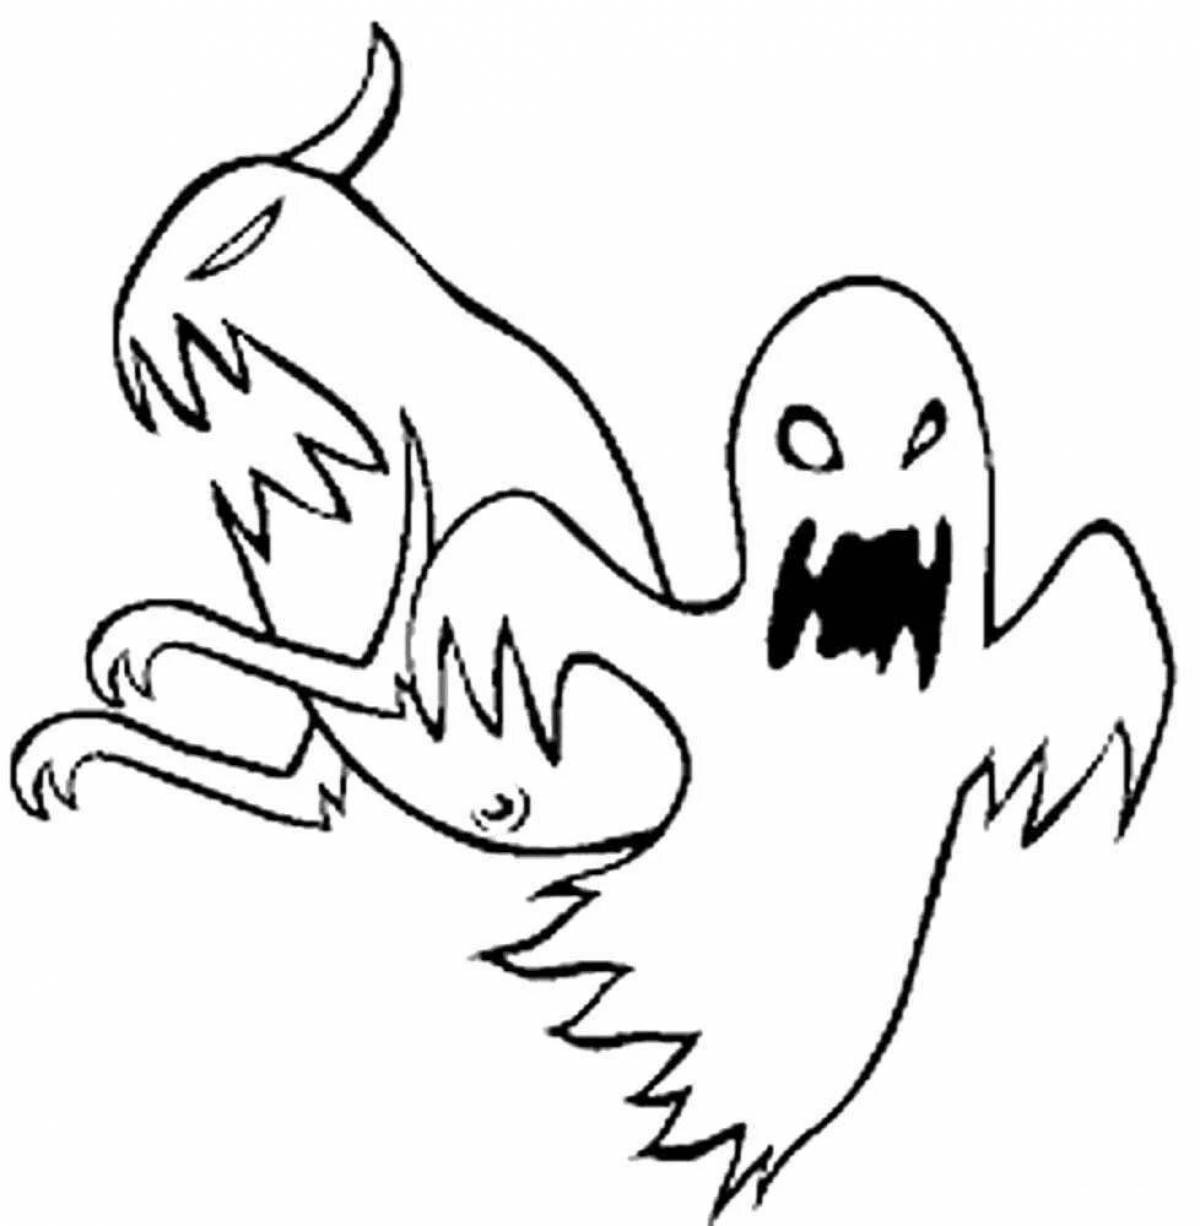 Nervous ghost coloring book for kids